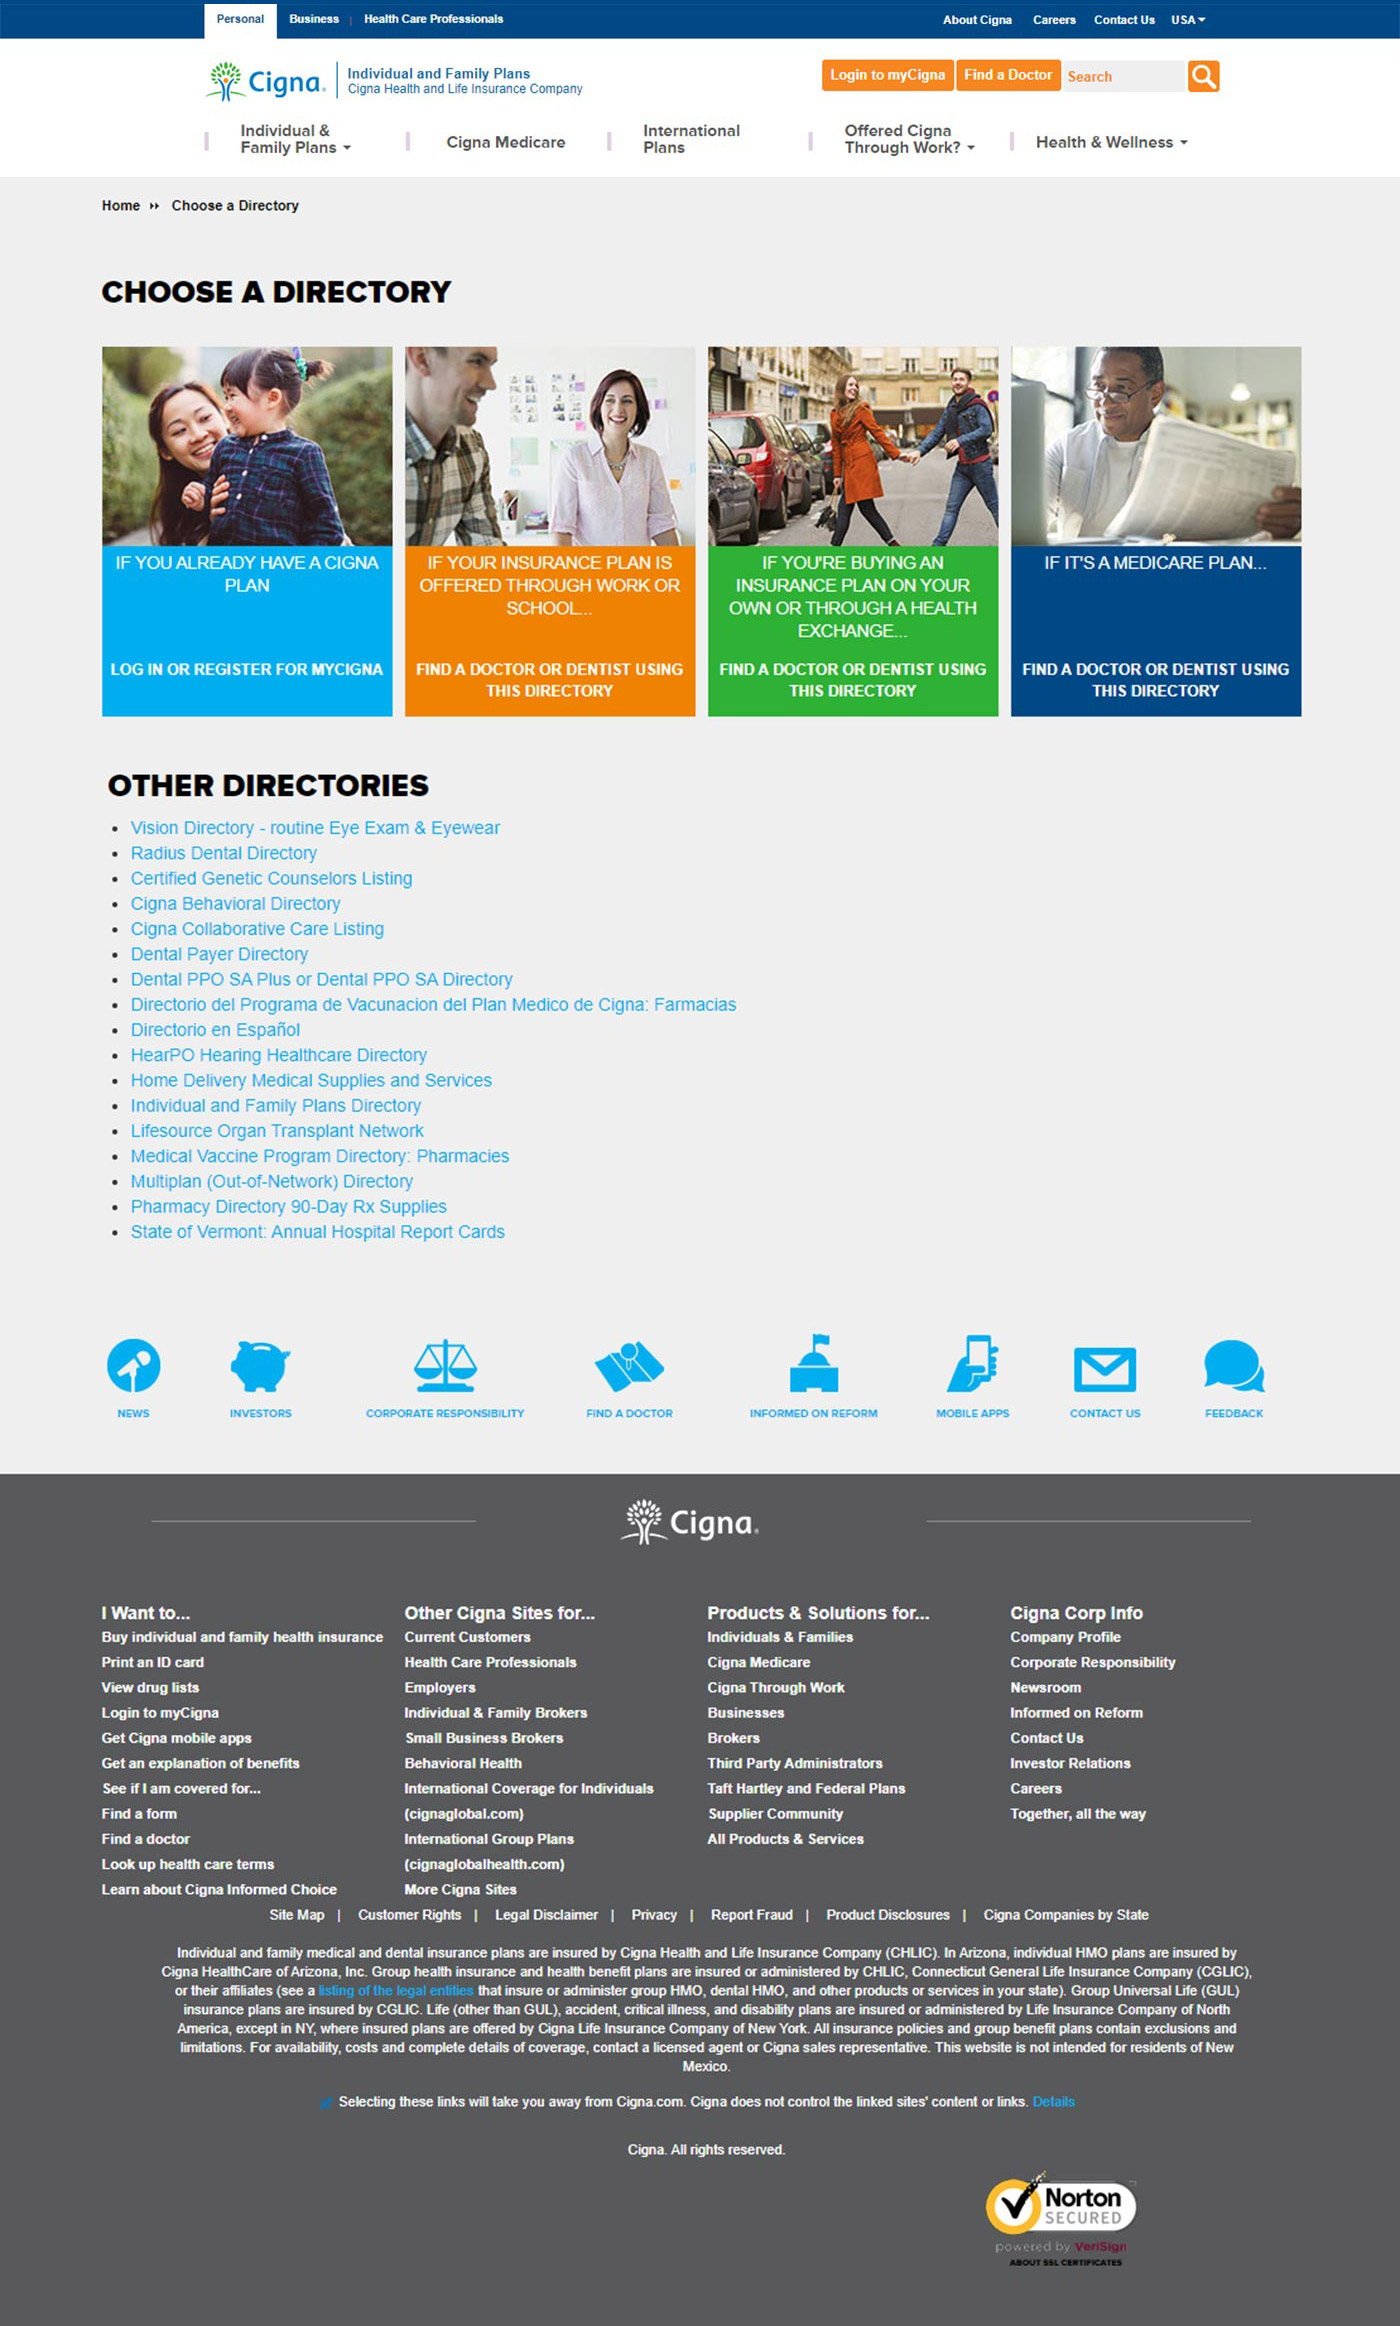 Cigna IFP Landing Page - Before